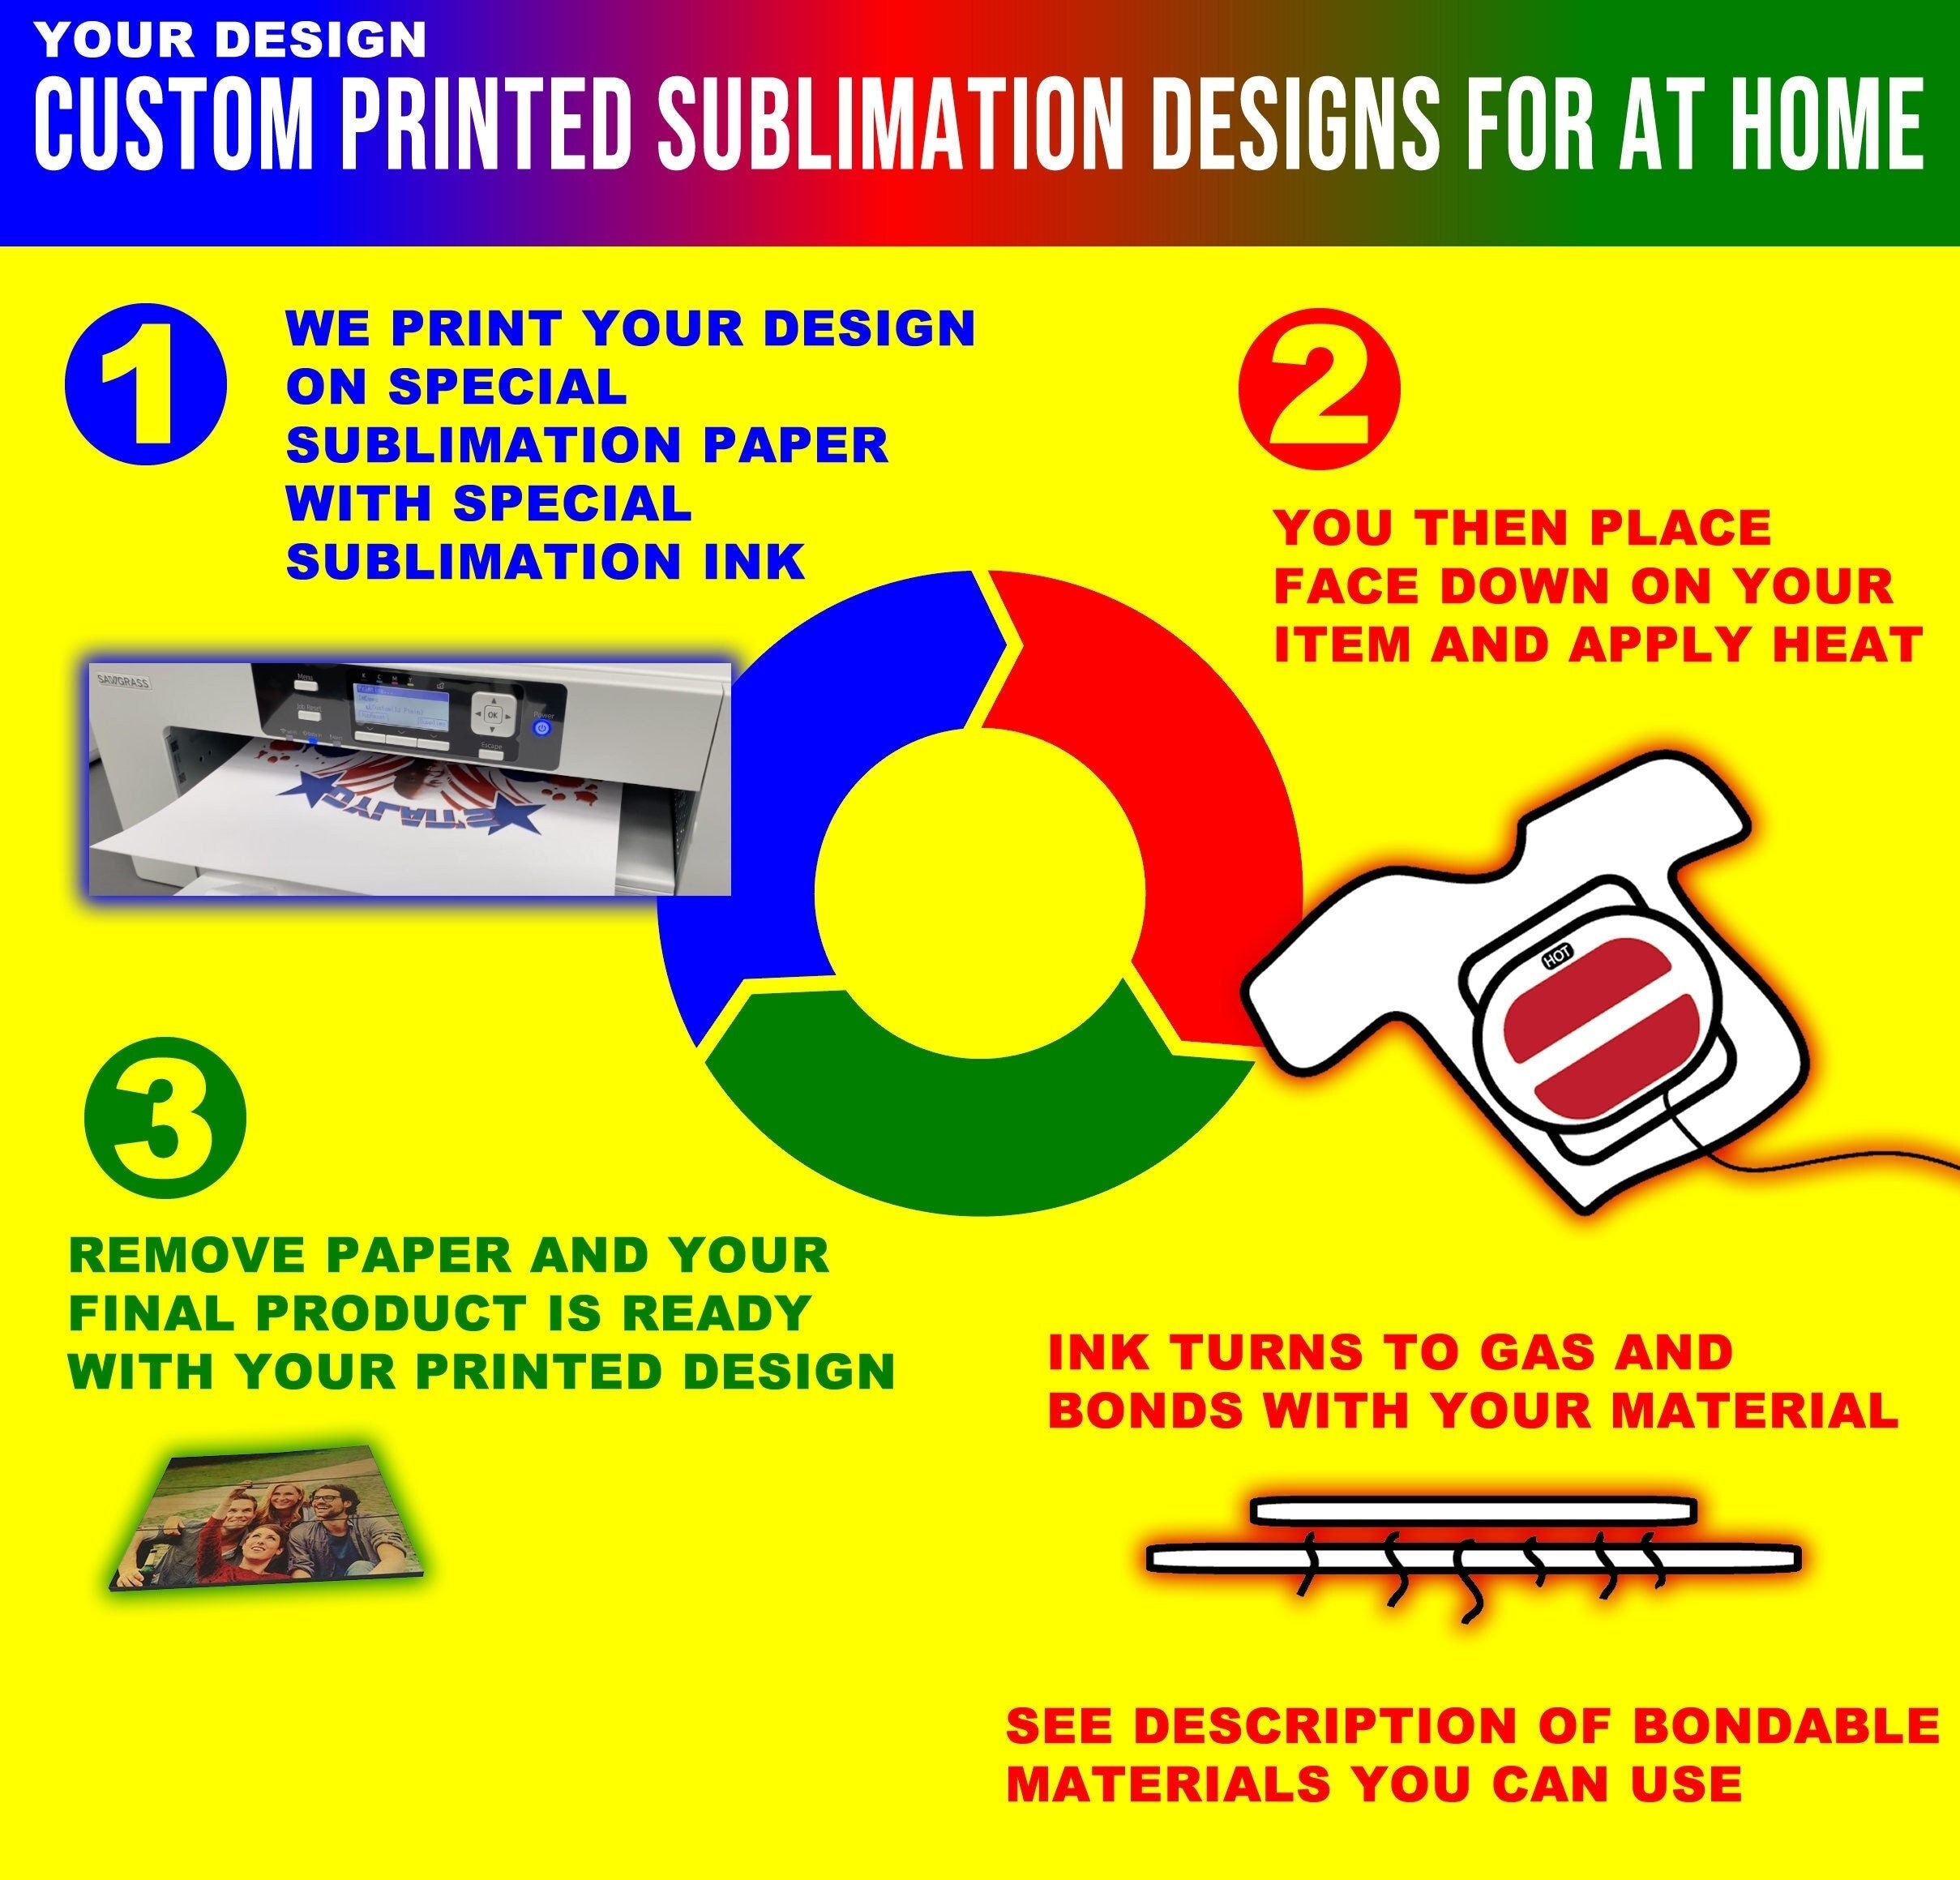 Sublimation Custom Designs Printed and Mailed To You For Do It Yourself At Home Applications